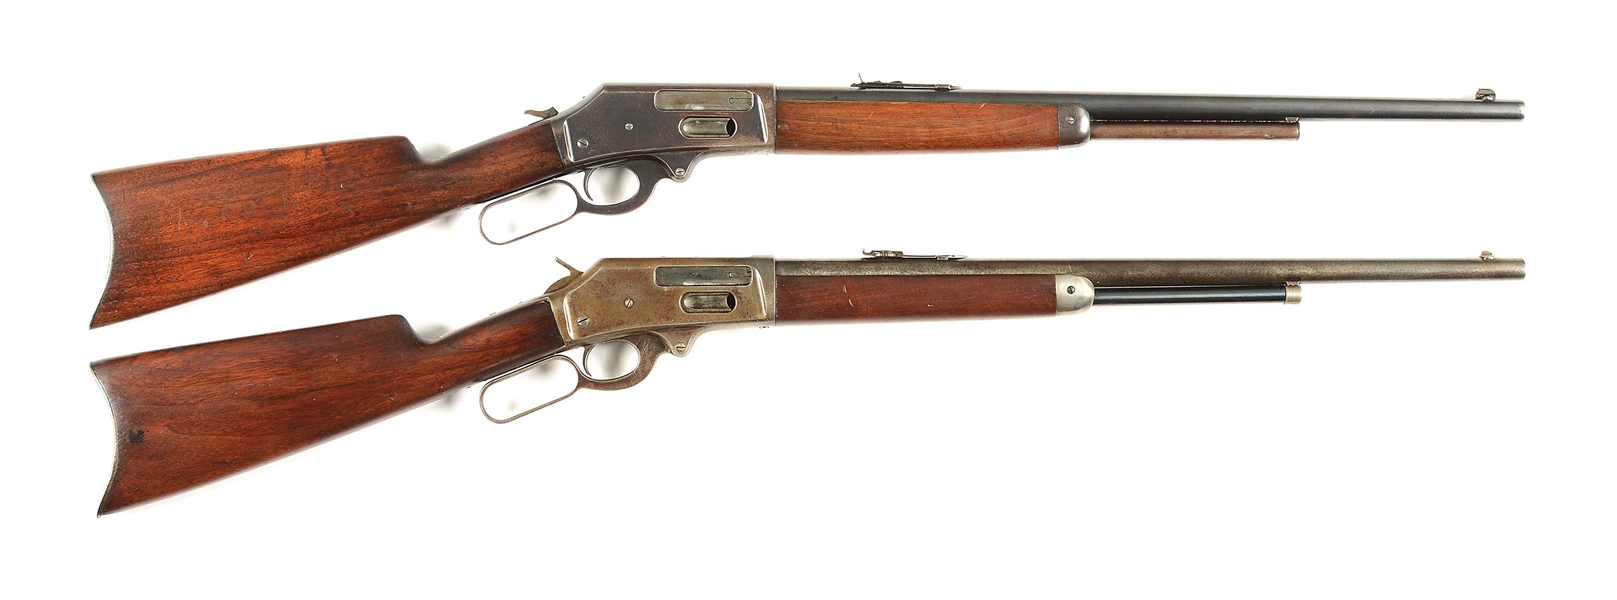 (C) RARE COLLECTORS  LOT OF 2: STEVENS 425 HIGH POWER LEVER ACTION RIFLES.